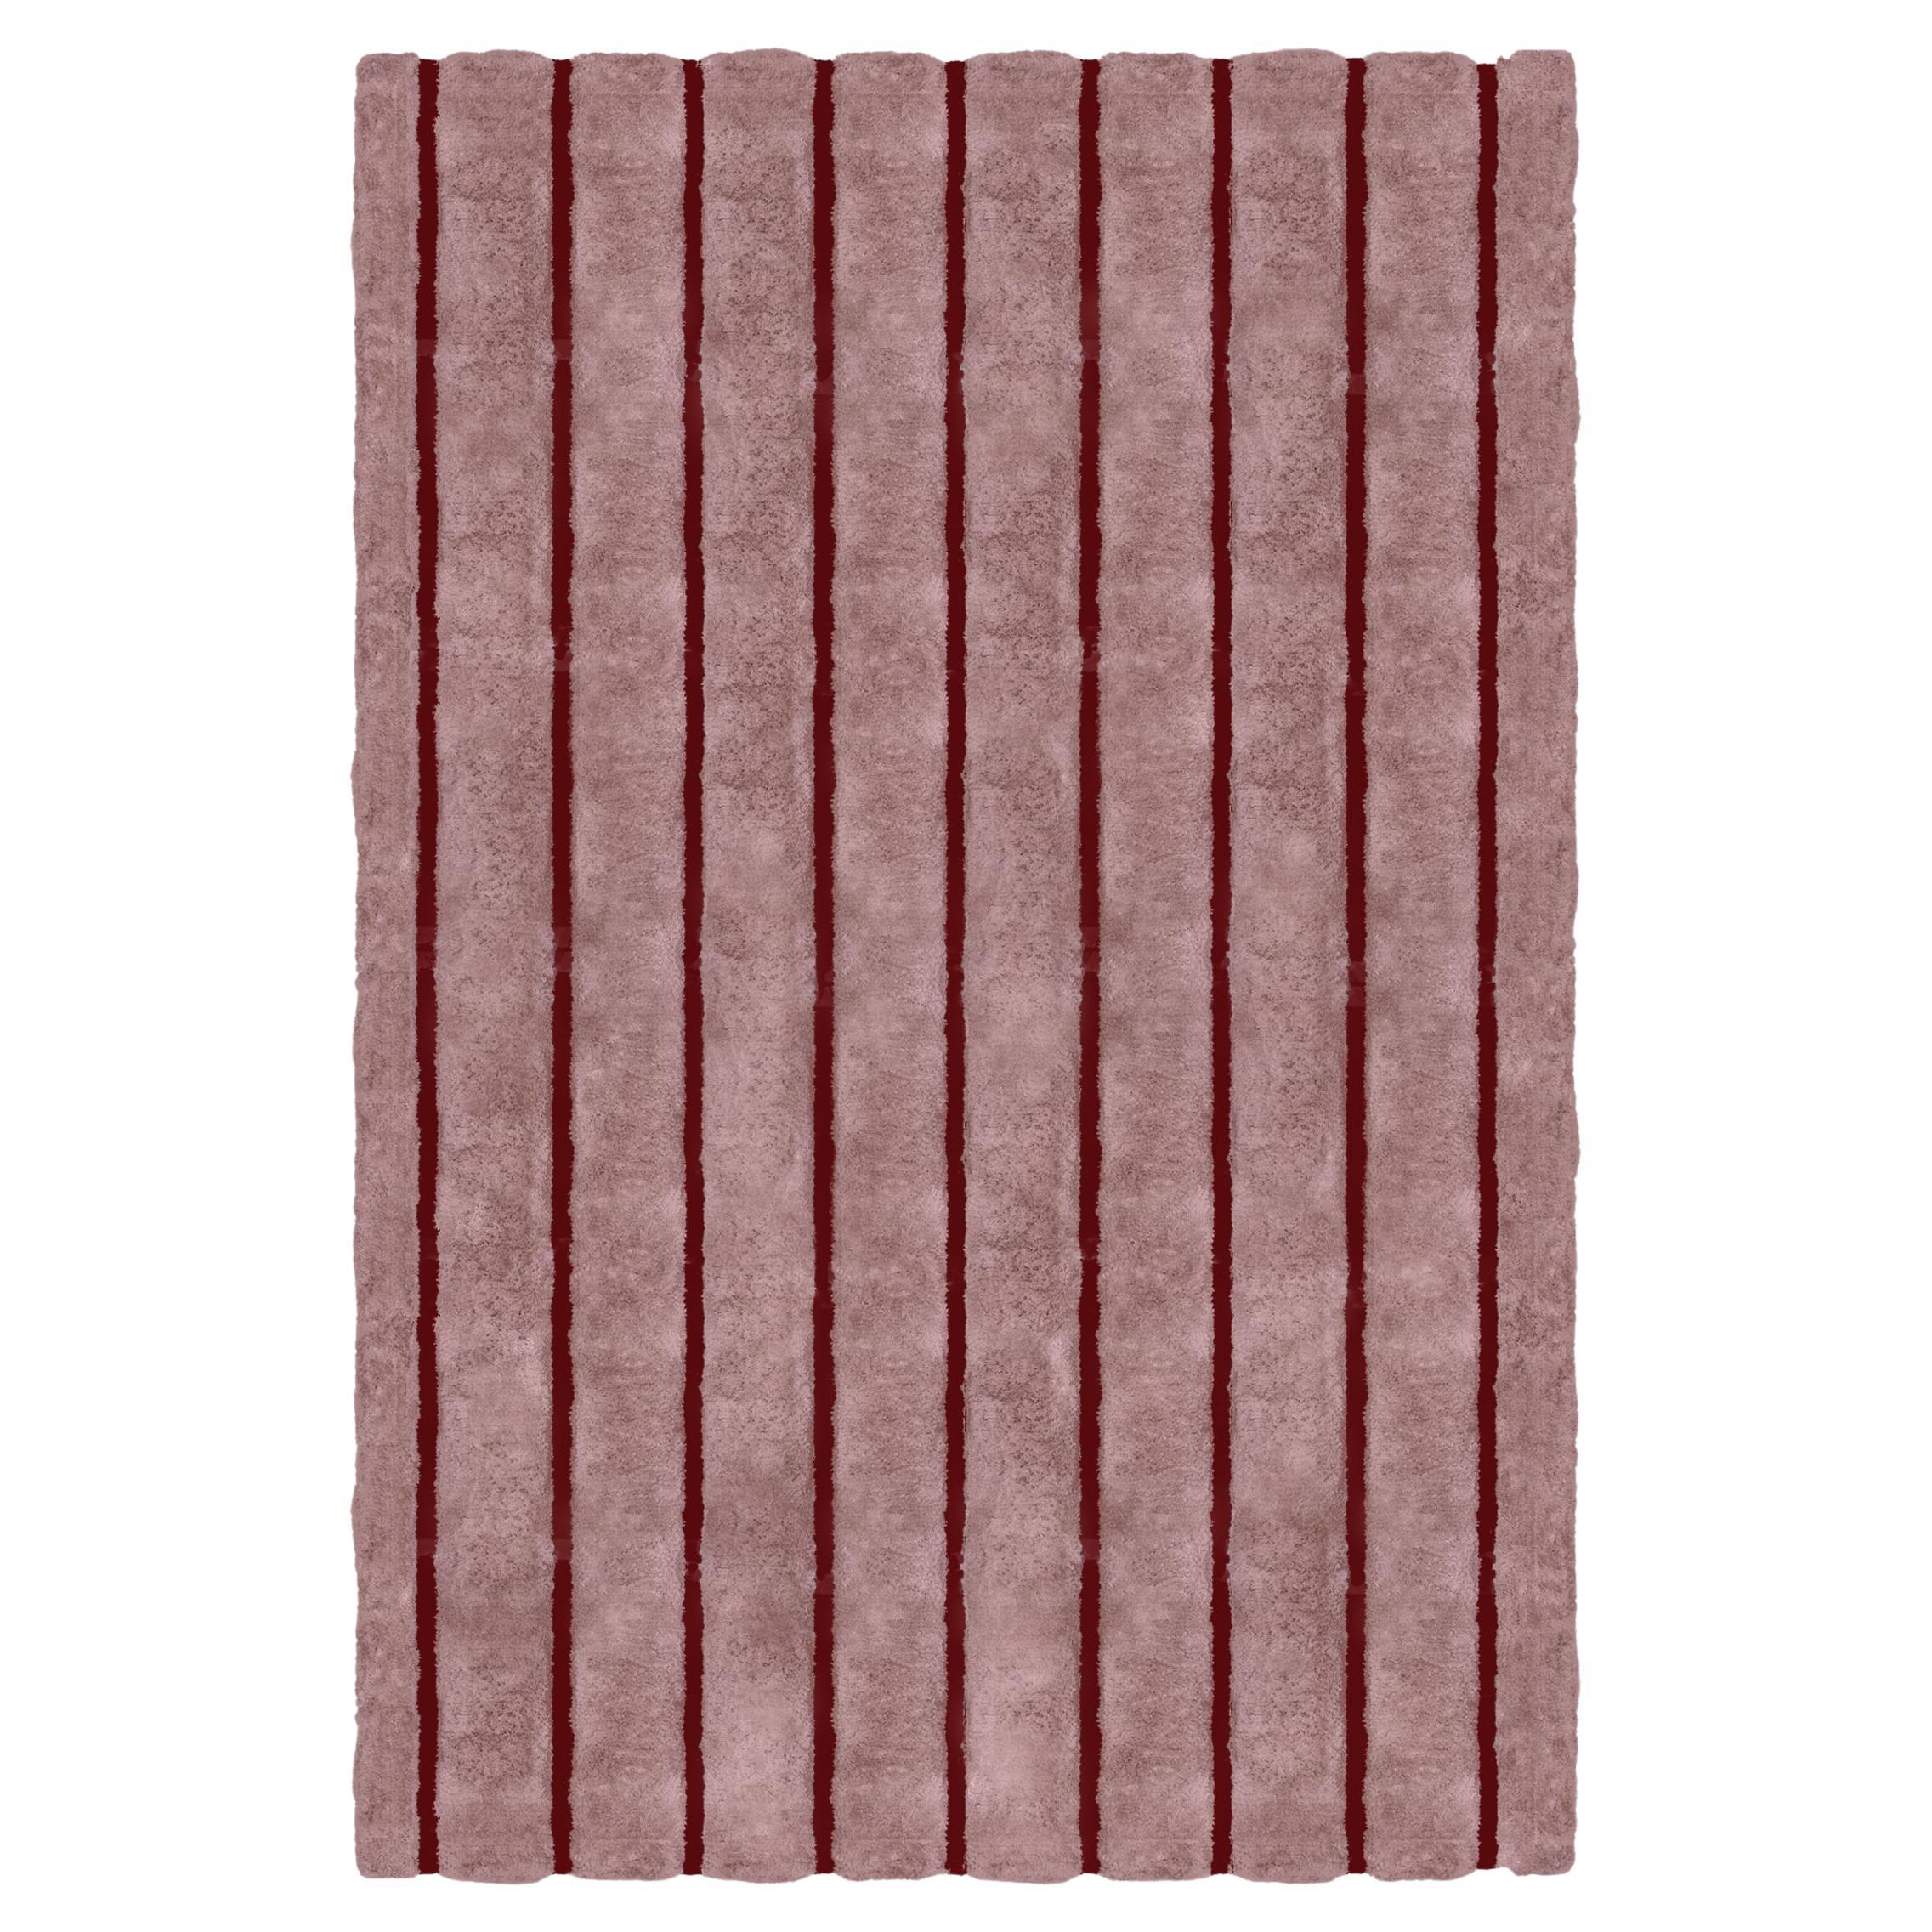 Ever Hand-Tufted Pink Rug, Take Me Up Collection by Paolo Stella For Sale